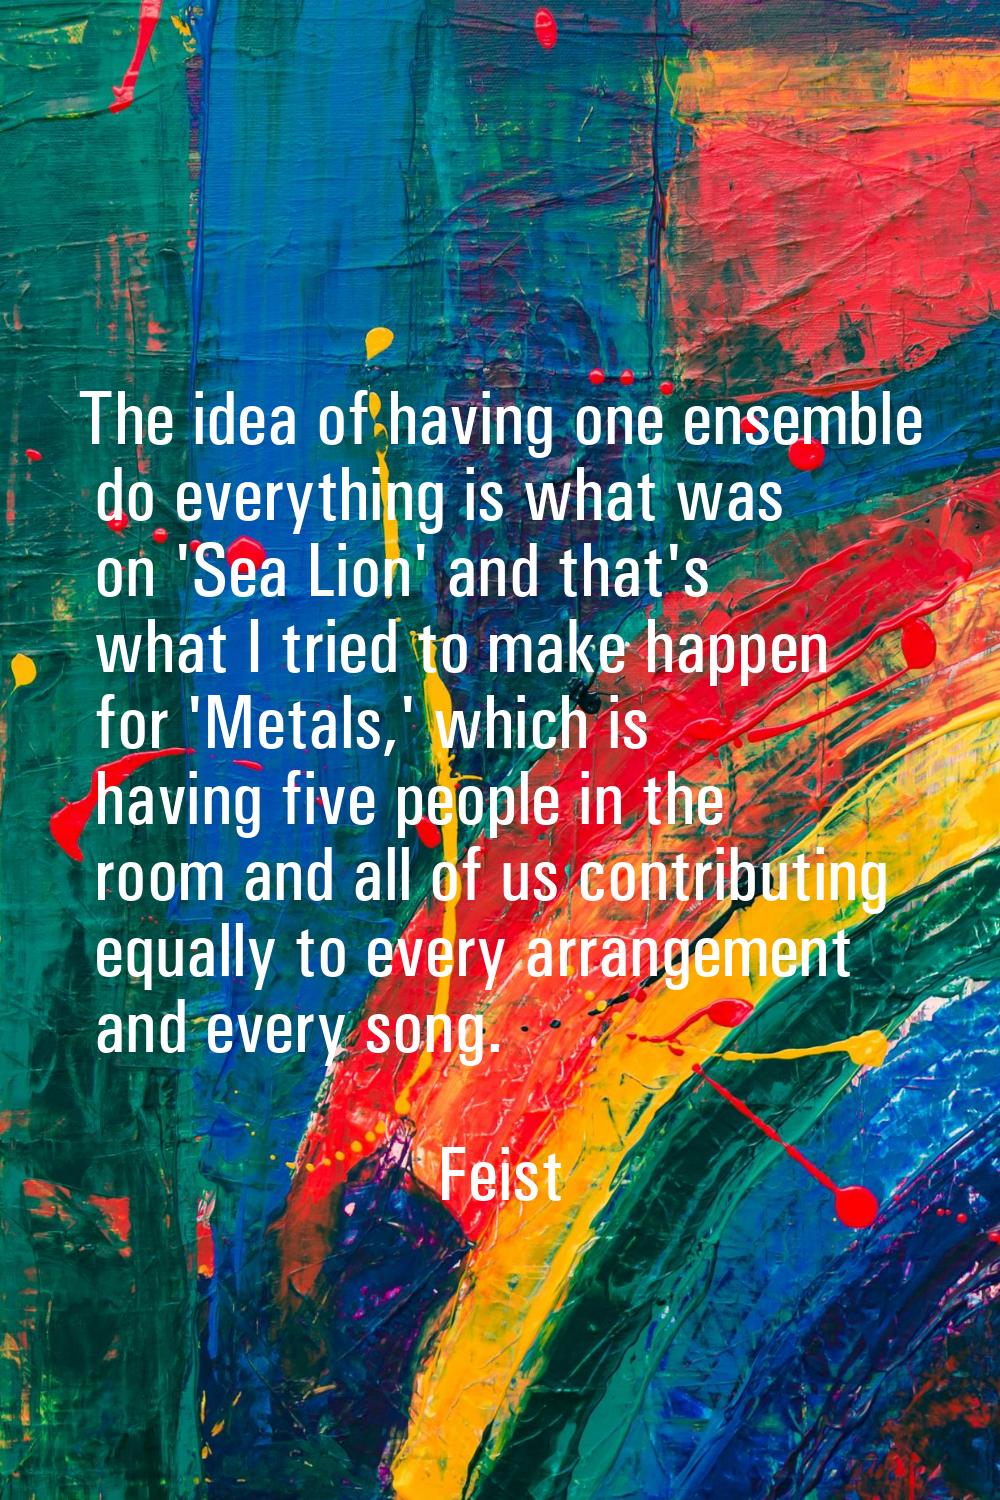 The idea of having one ensemble do everything is what was on 'Sea Lion' and that's what I tried to 